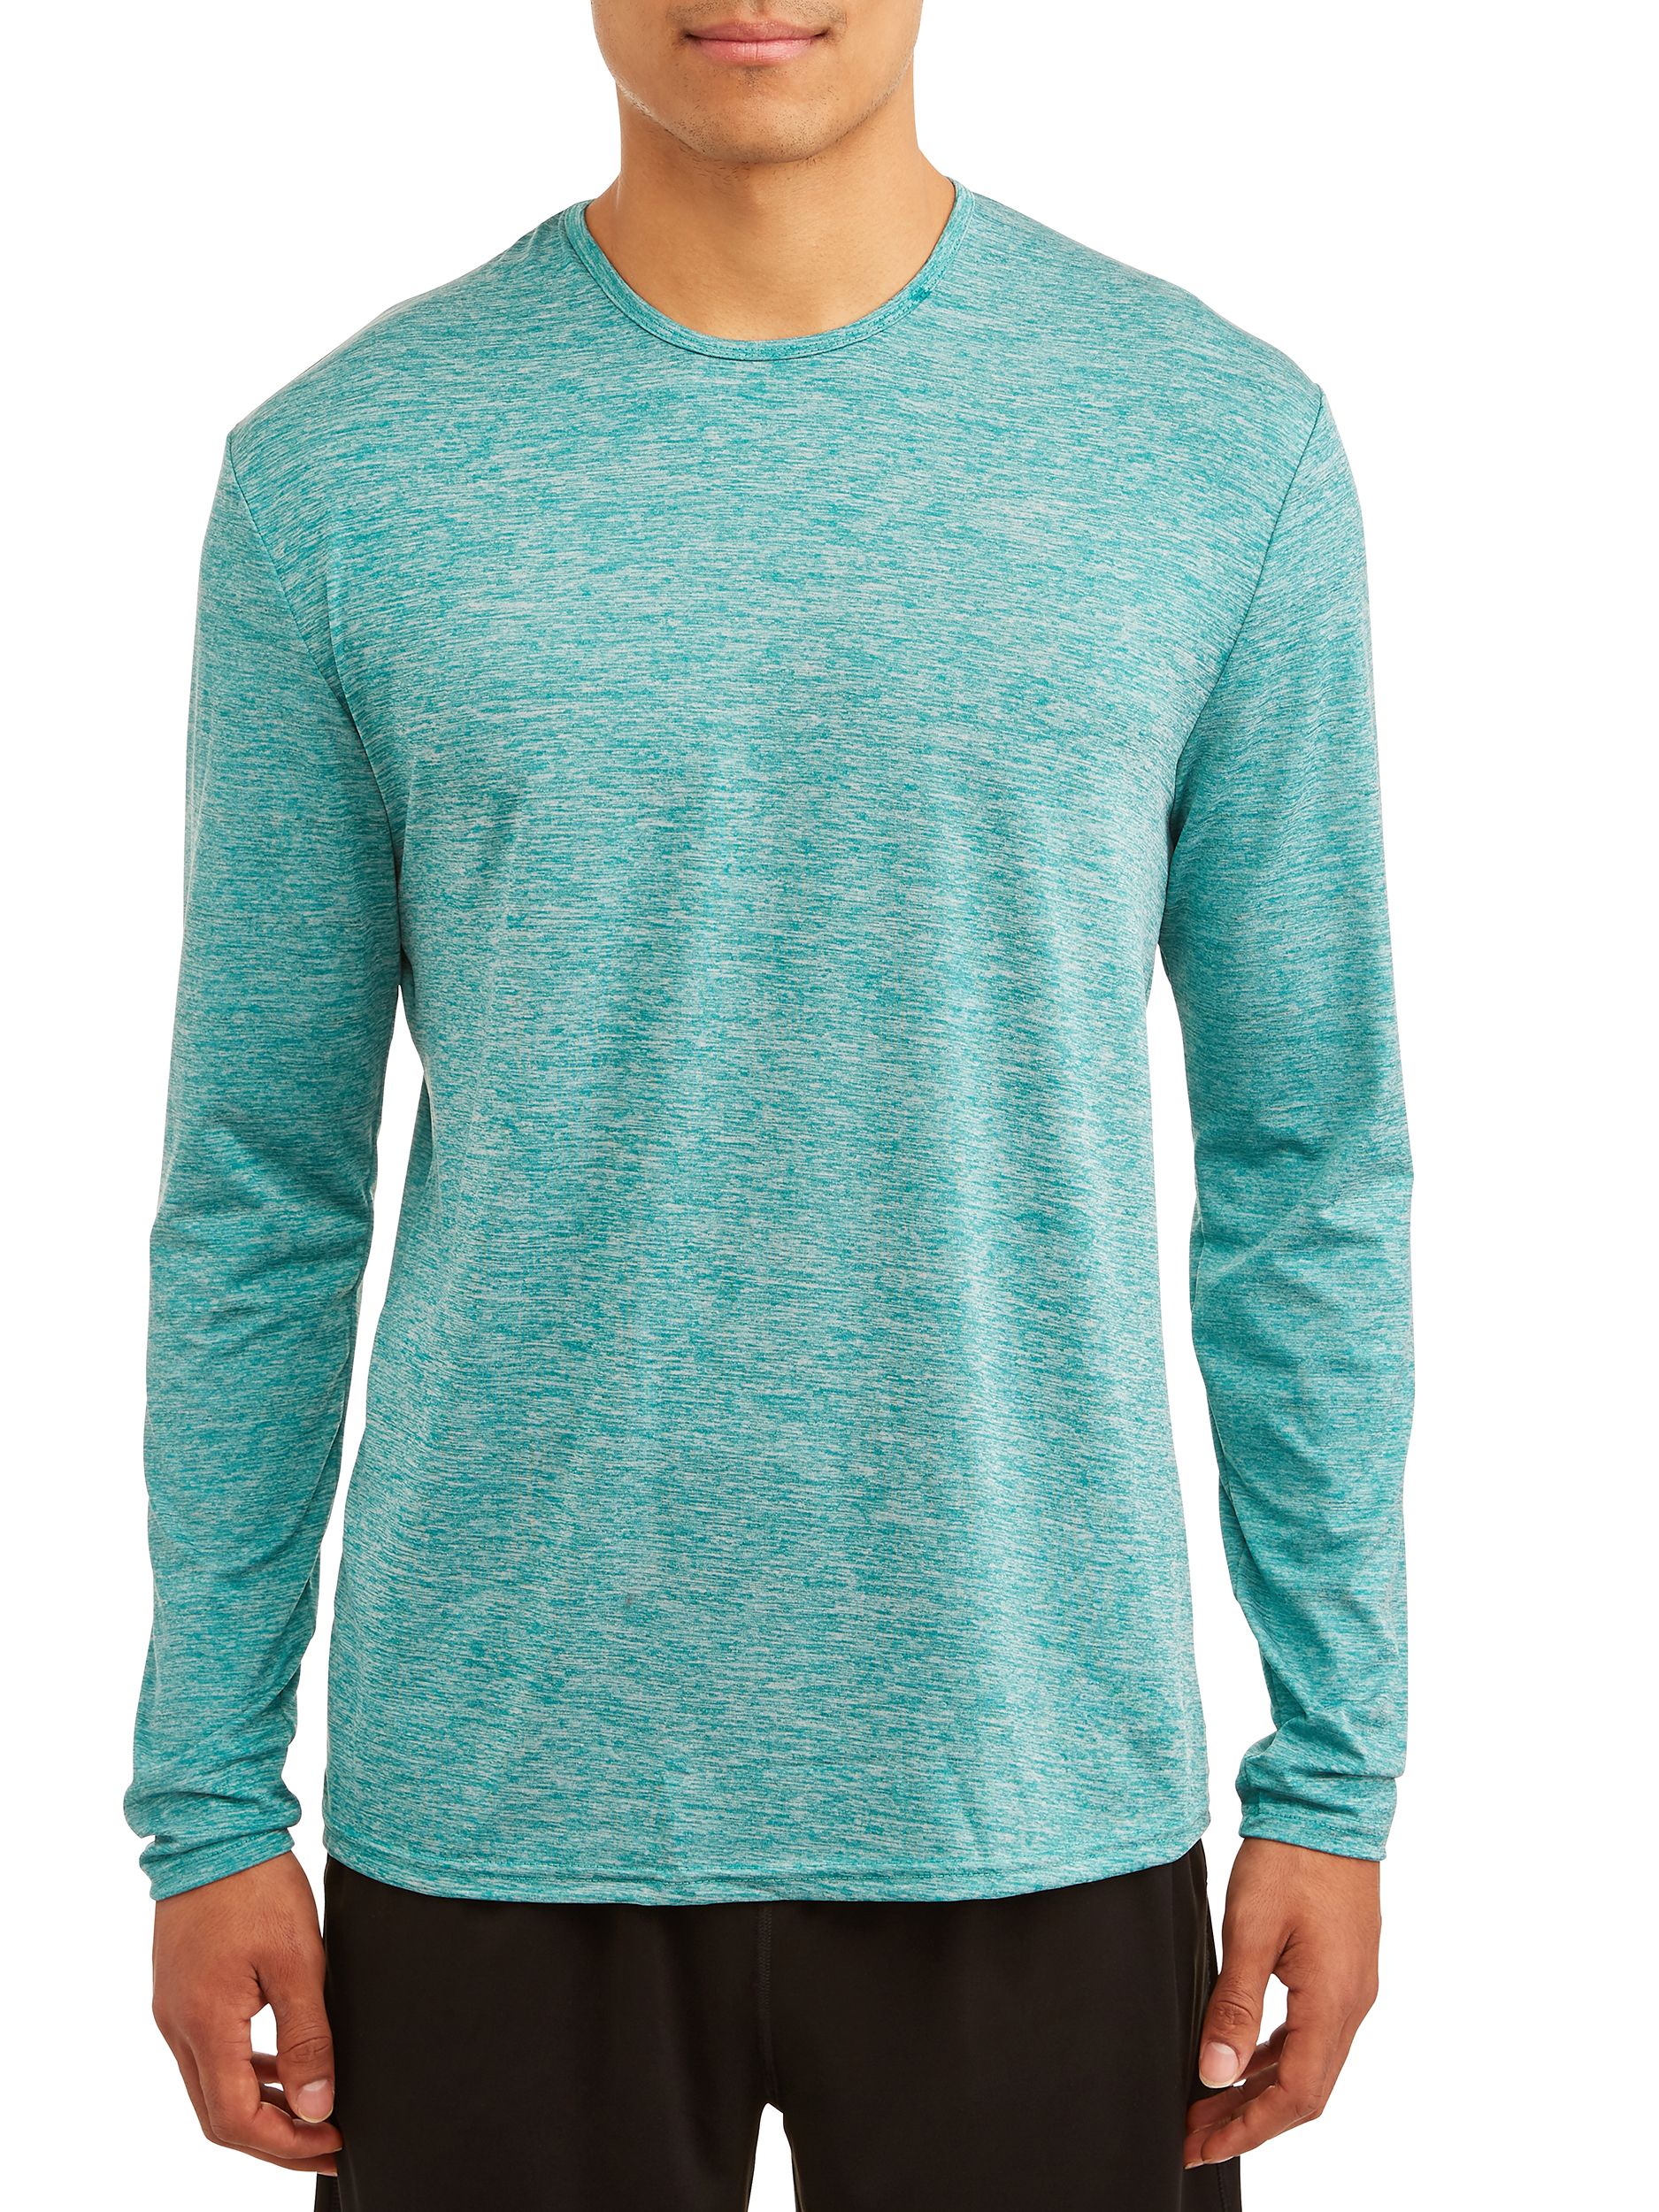 Blue Star Clothing Men's Base Layer Performance Heathered Long Sleeve Crew Neck Fitness T-Shirt - 2 Pack - image 3 of 4